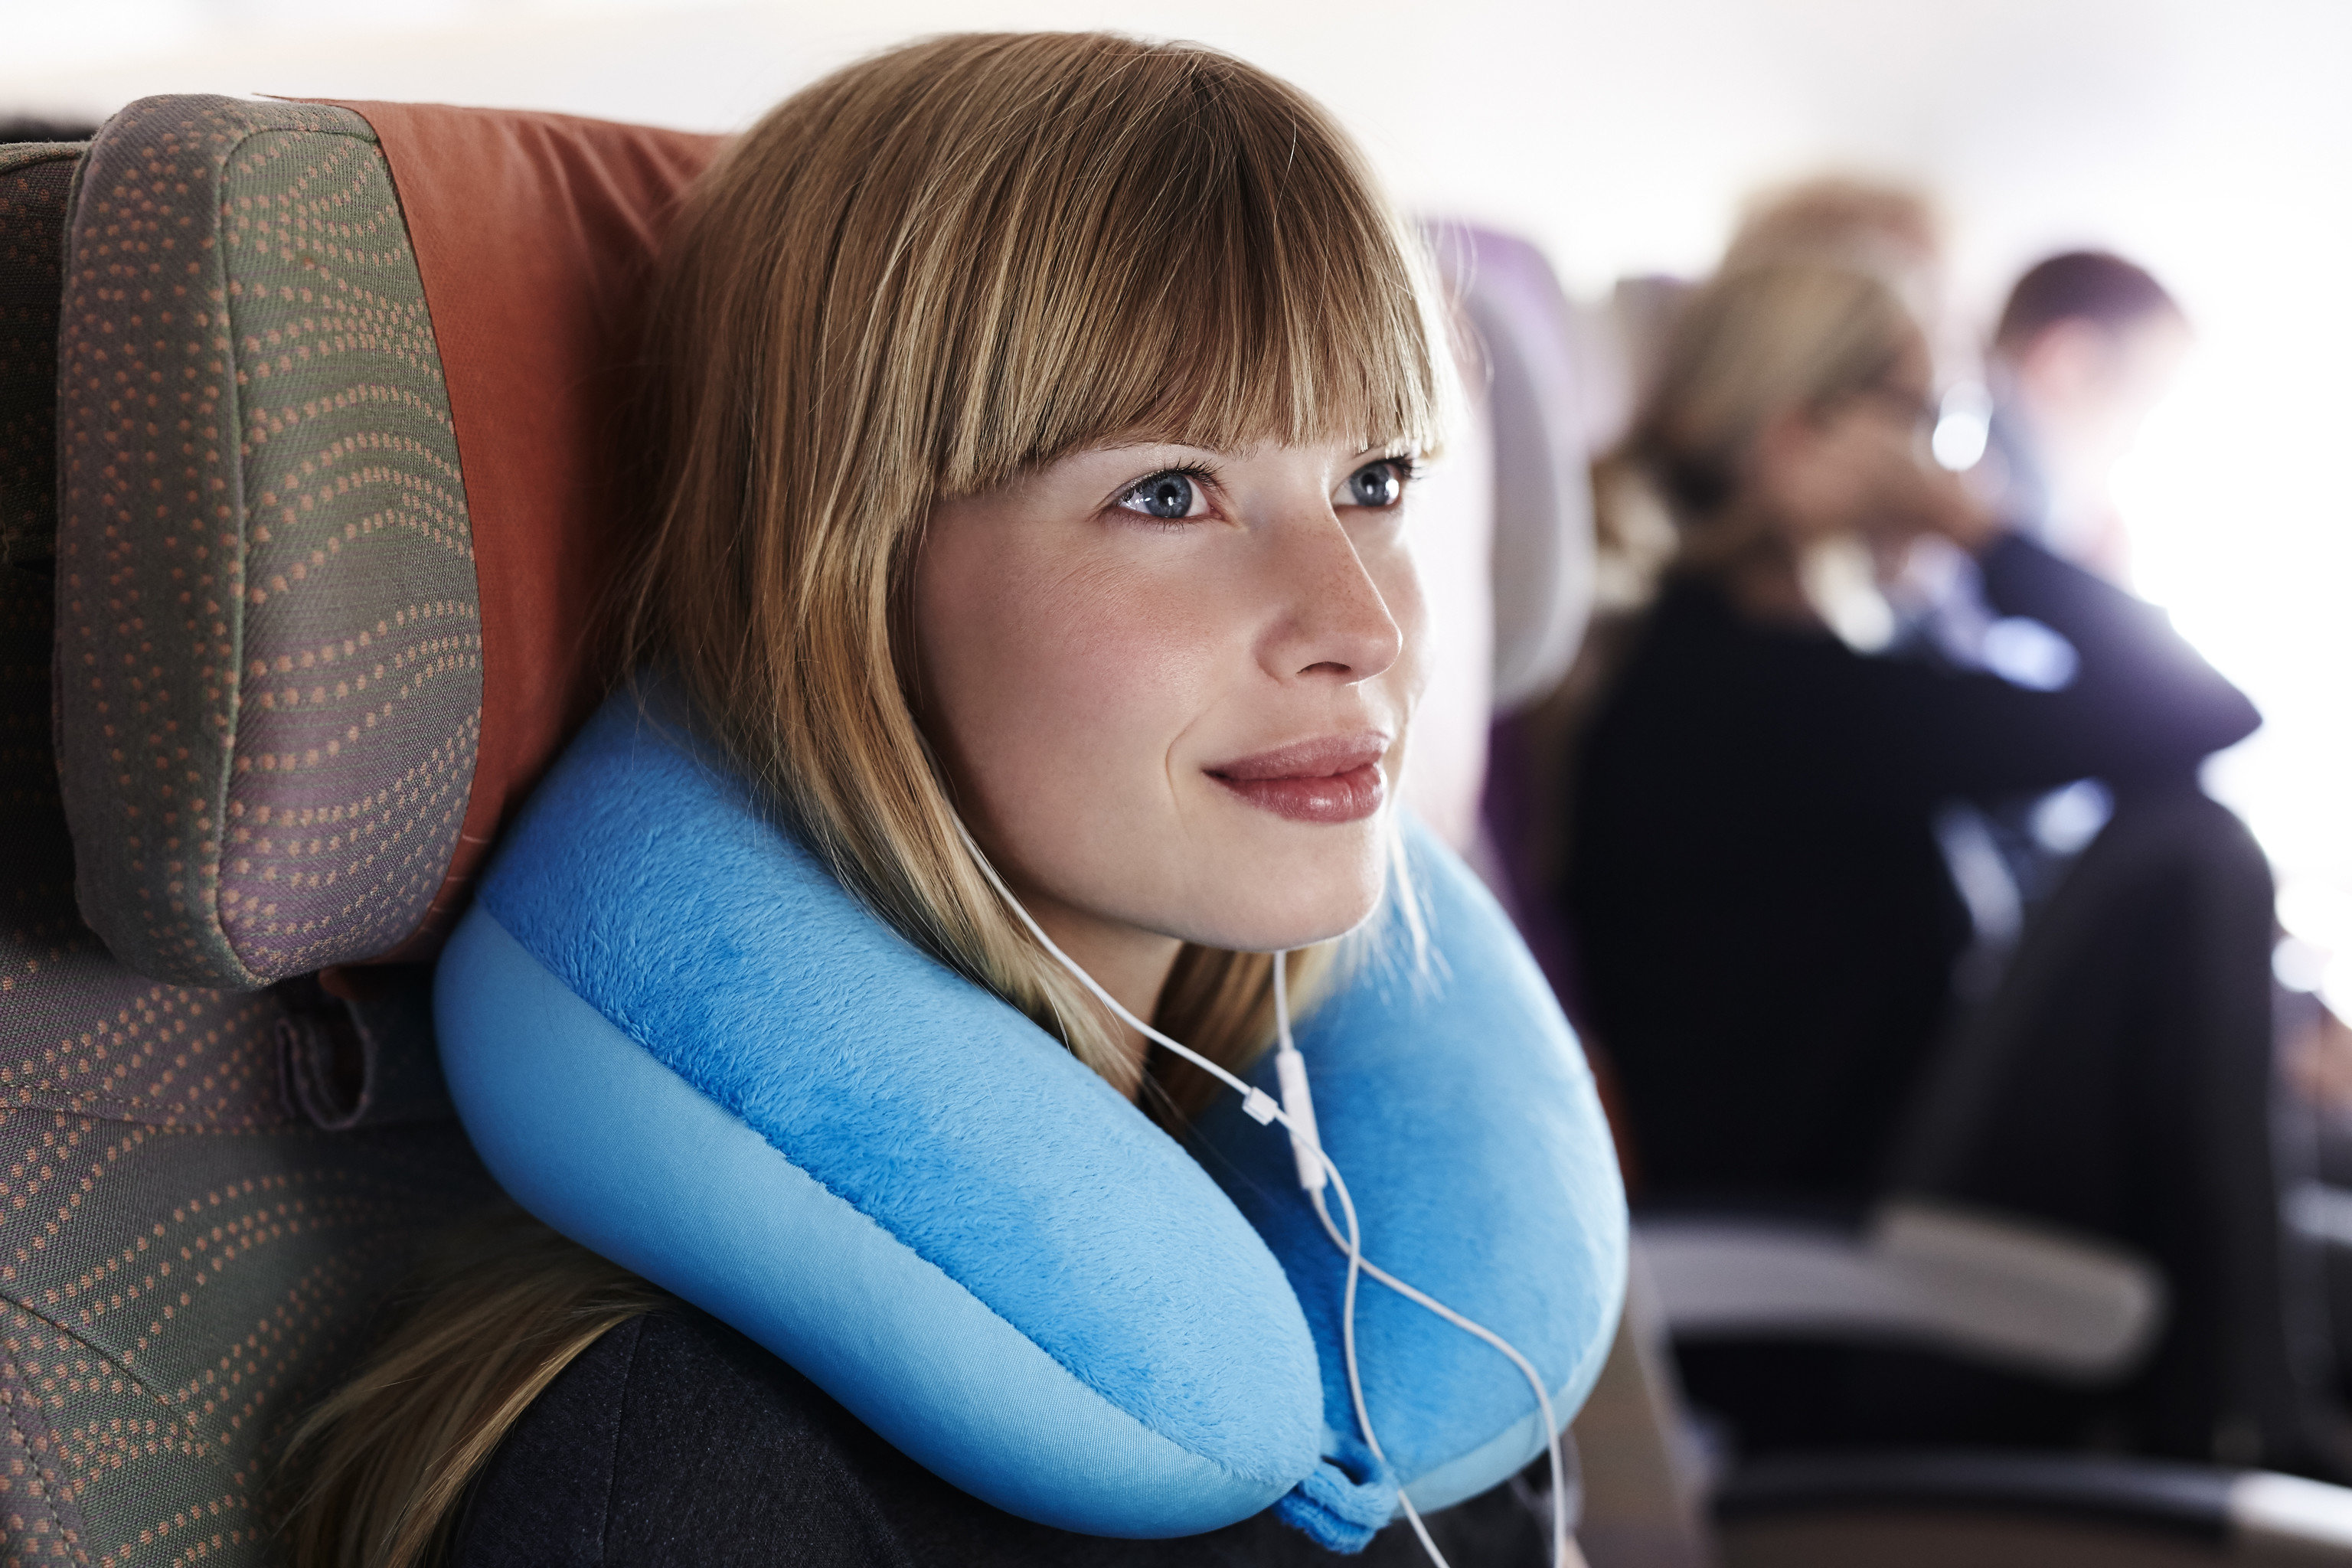 Travel Pillows For Airplanes Shop, 56% OFF | www.fexgolf.com